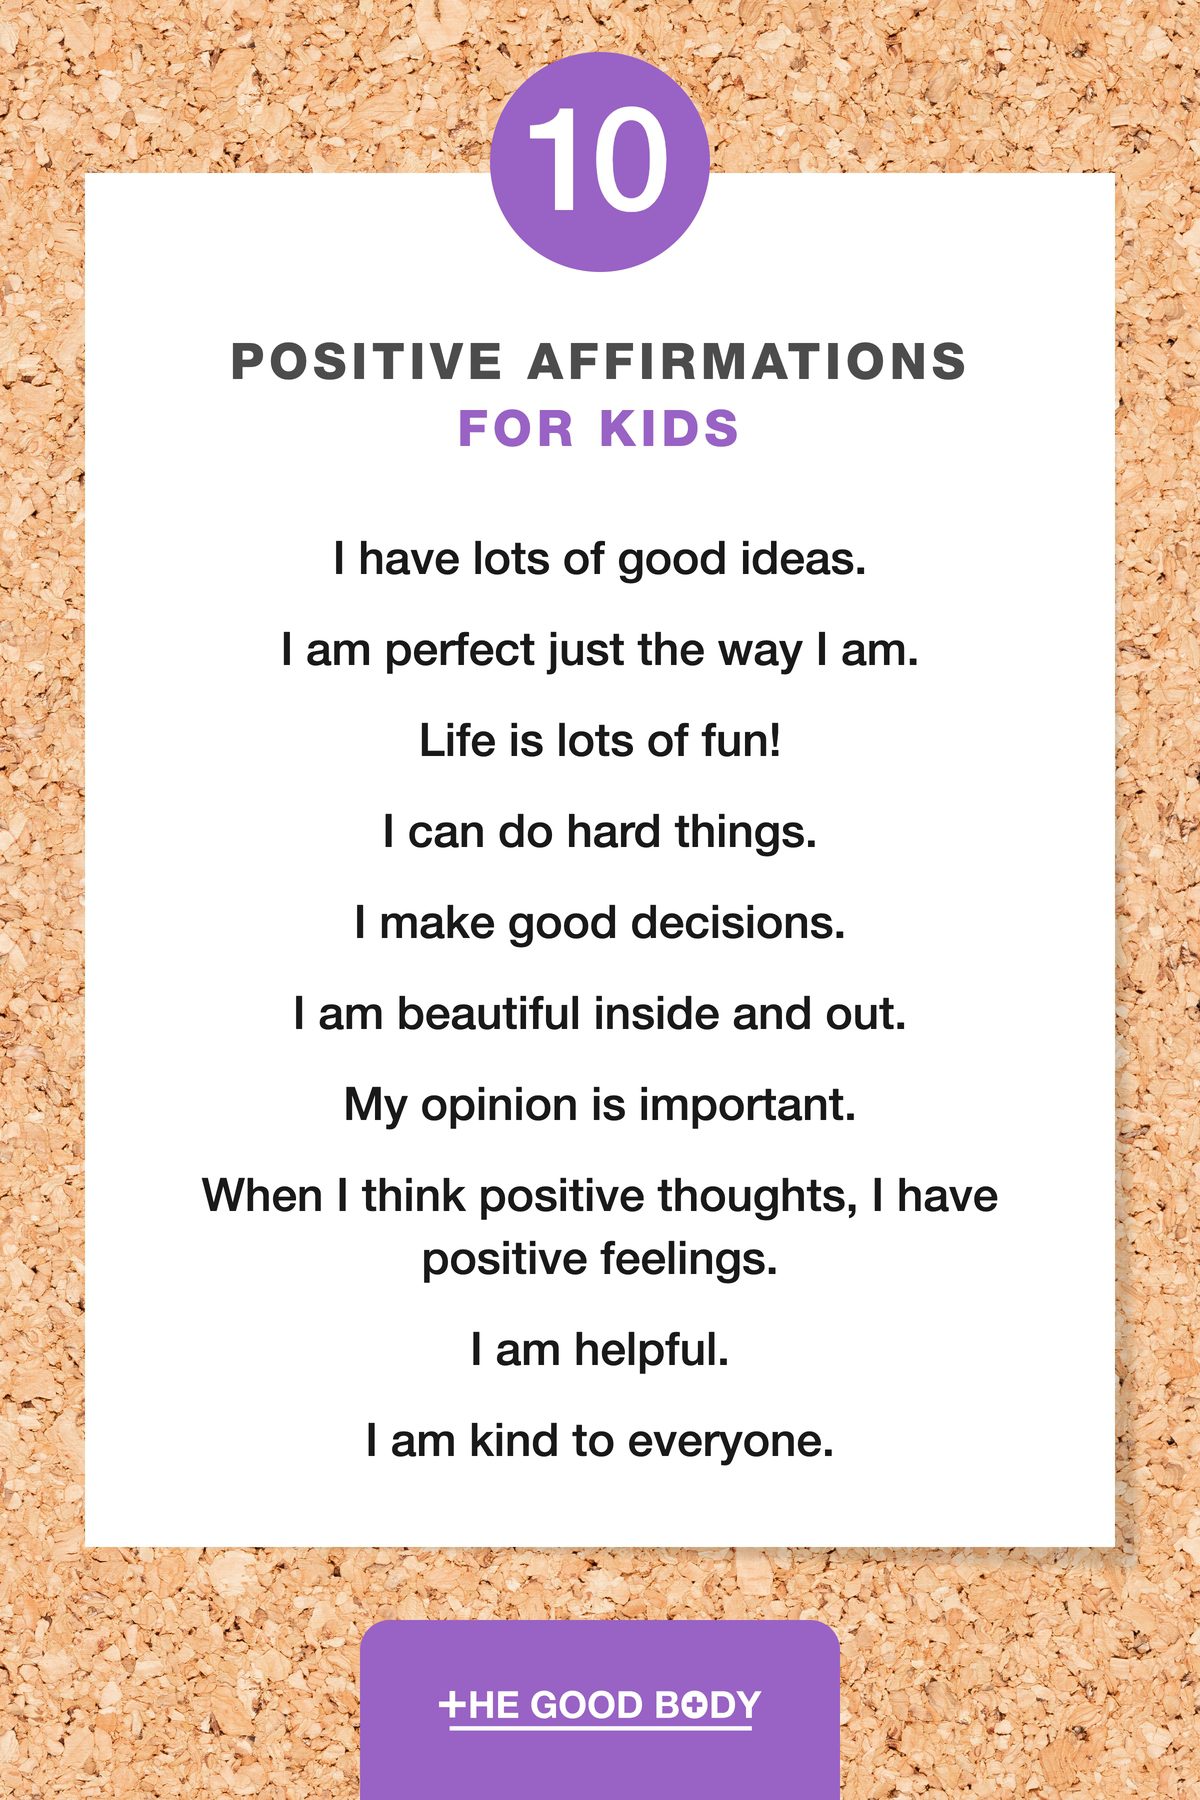 10 Positive Affirmations for Kids on White Paper, Set Against a Corkboard Background